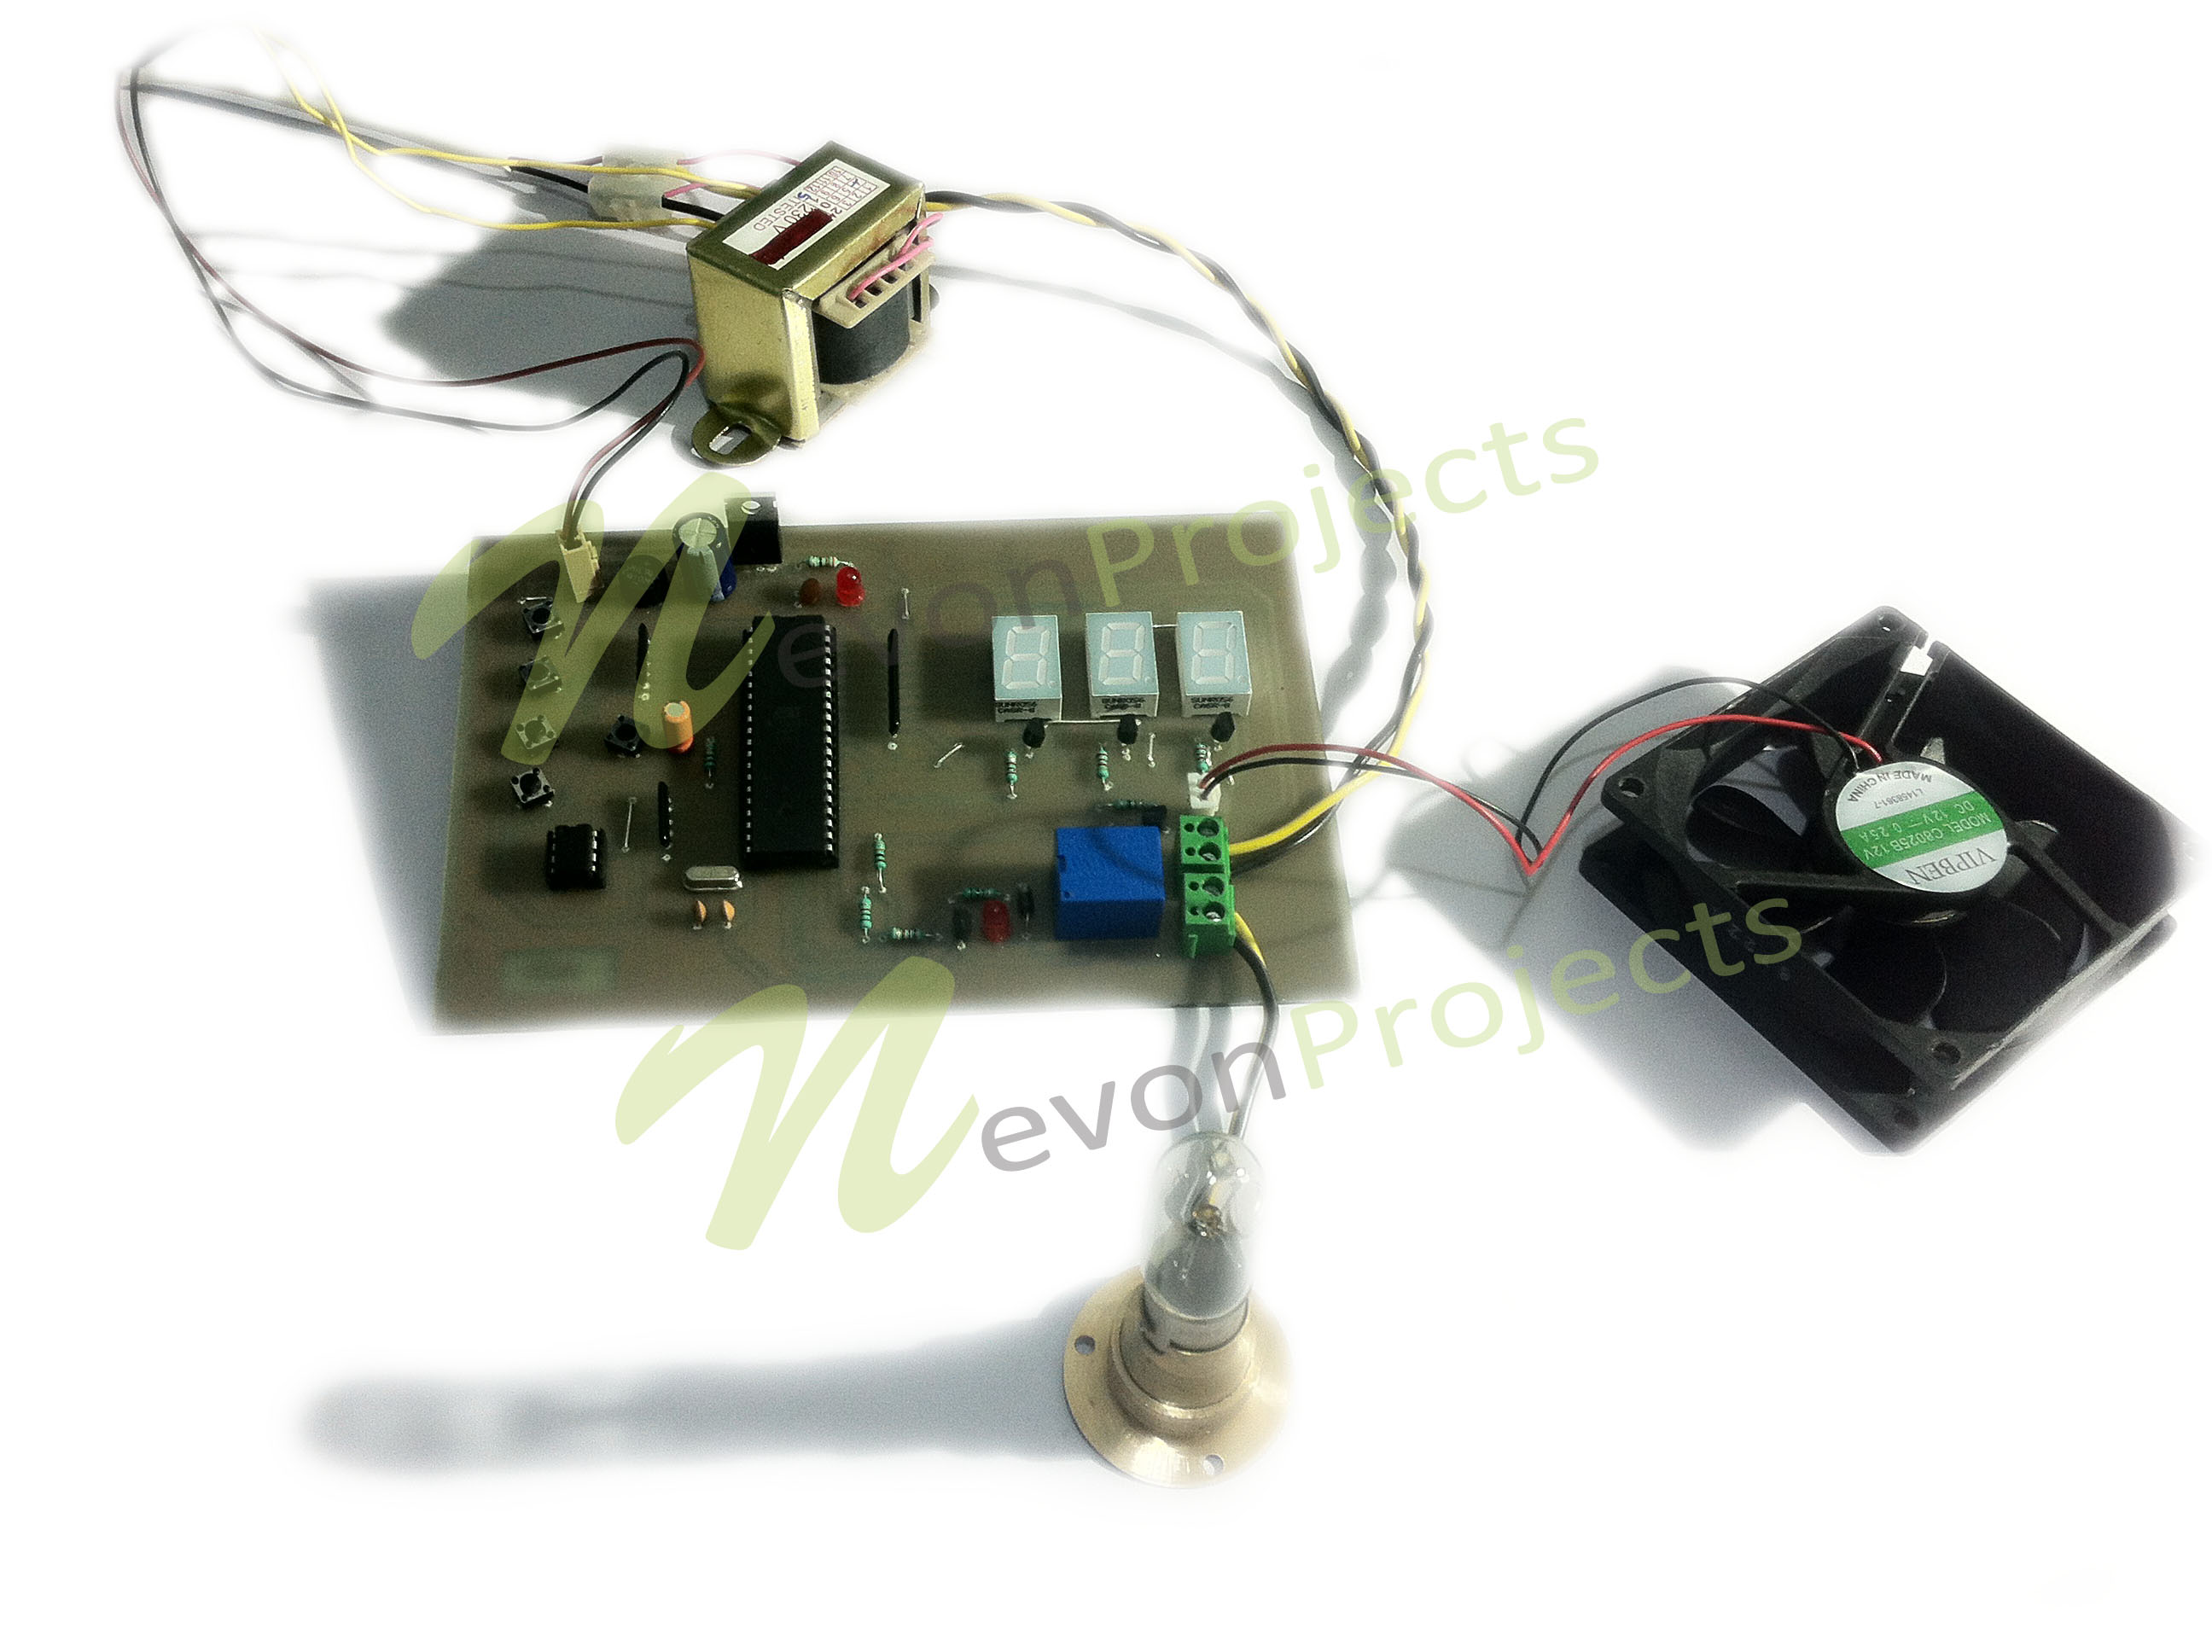 https://nevonprojects.com/wp-content/uploads/2015/05/Accurate-digital-temperature-controller.jpg